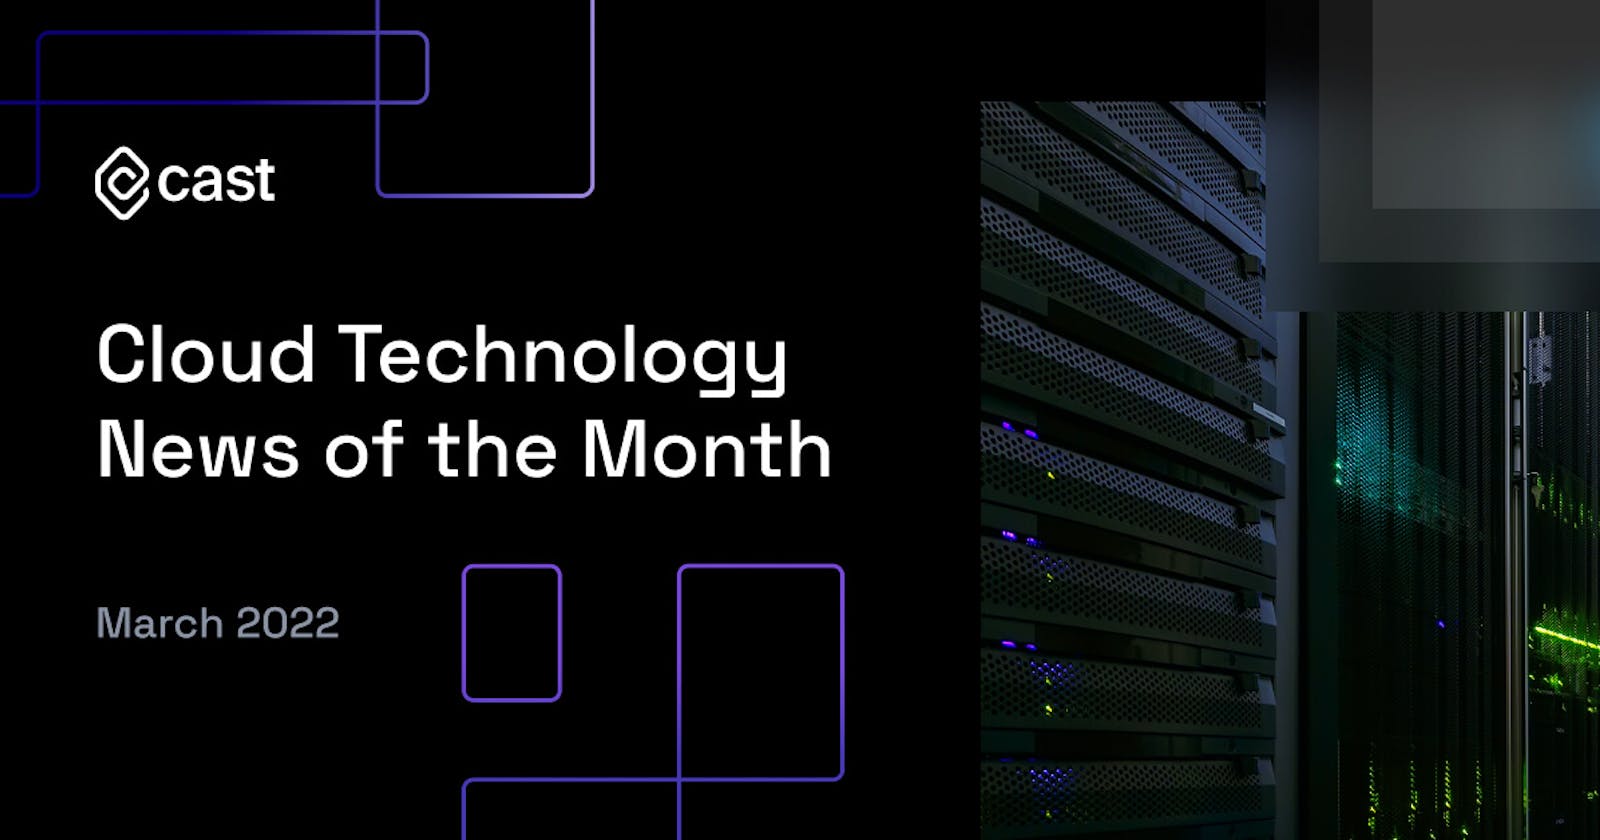 Cloud Technology News of the Month: March 2022